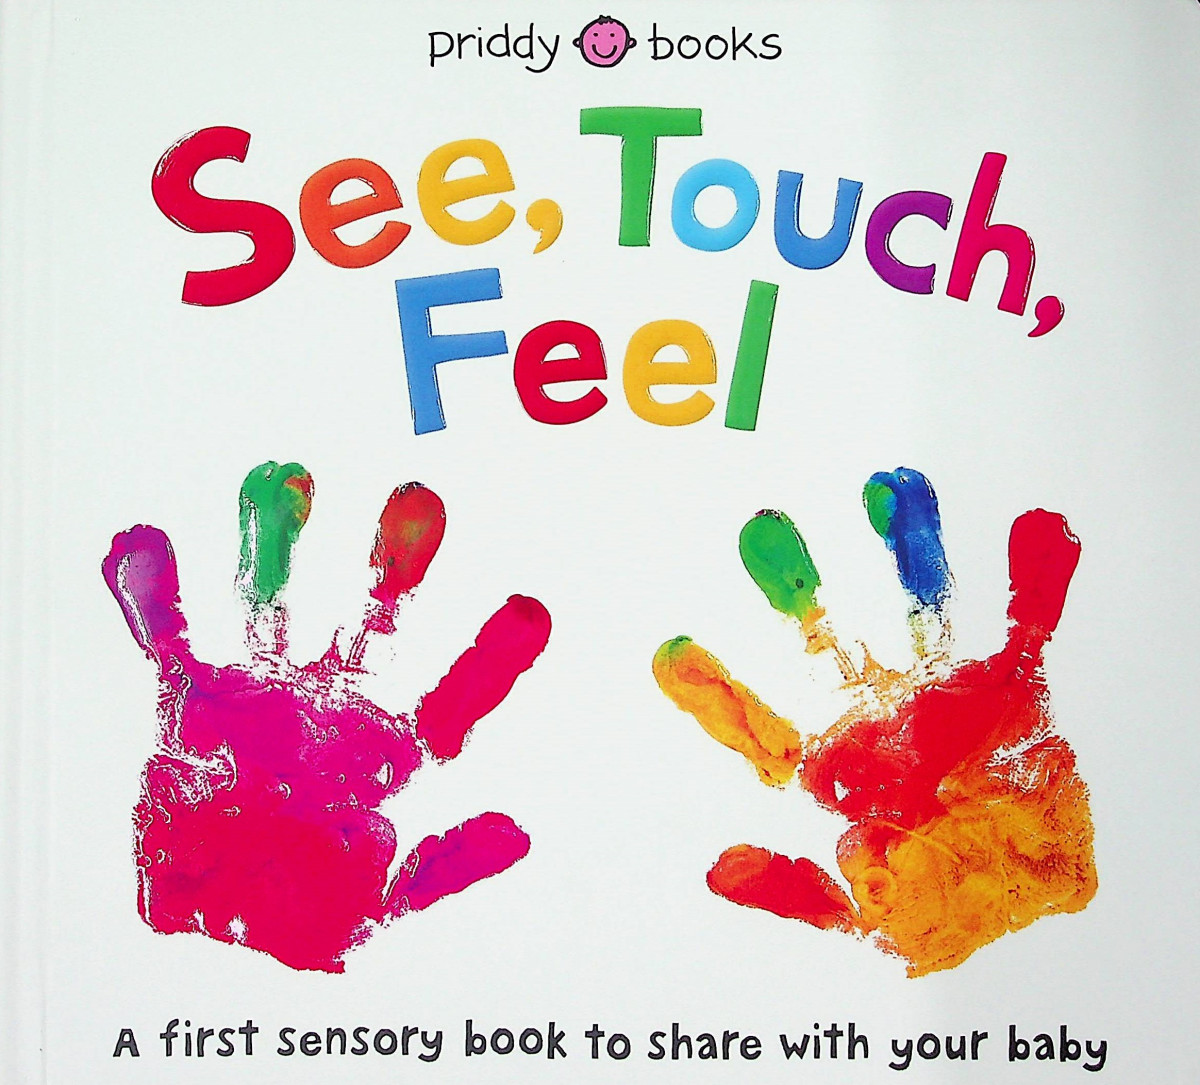 See, Touch, Feel